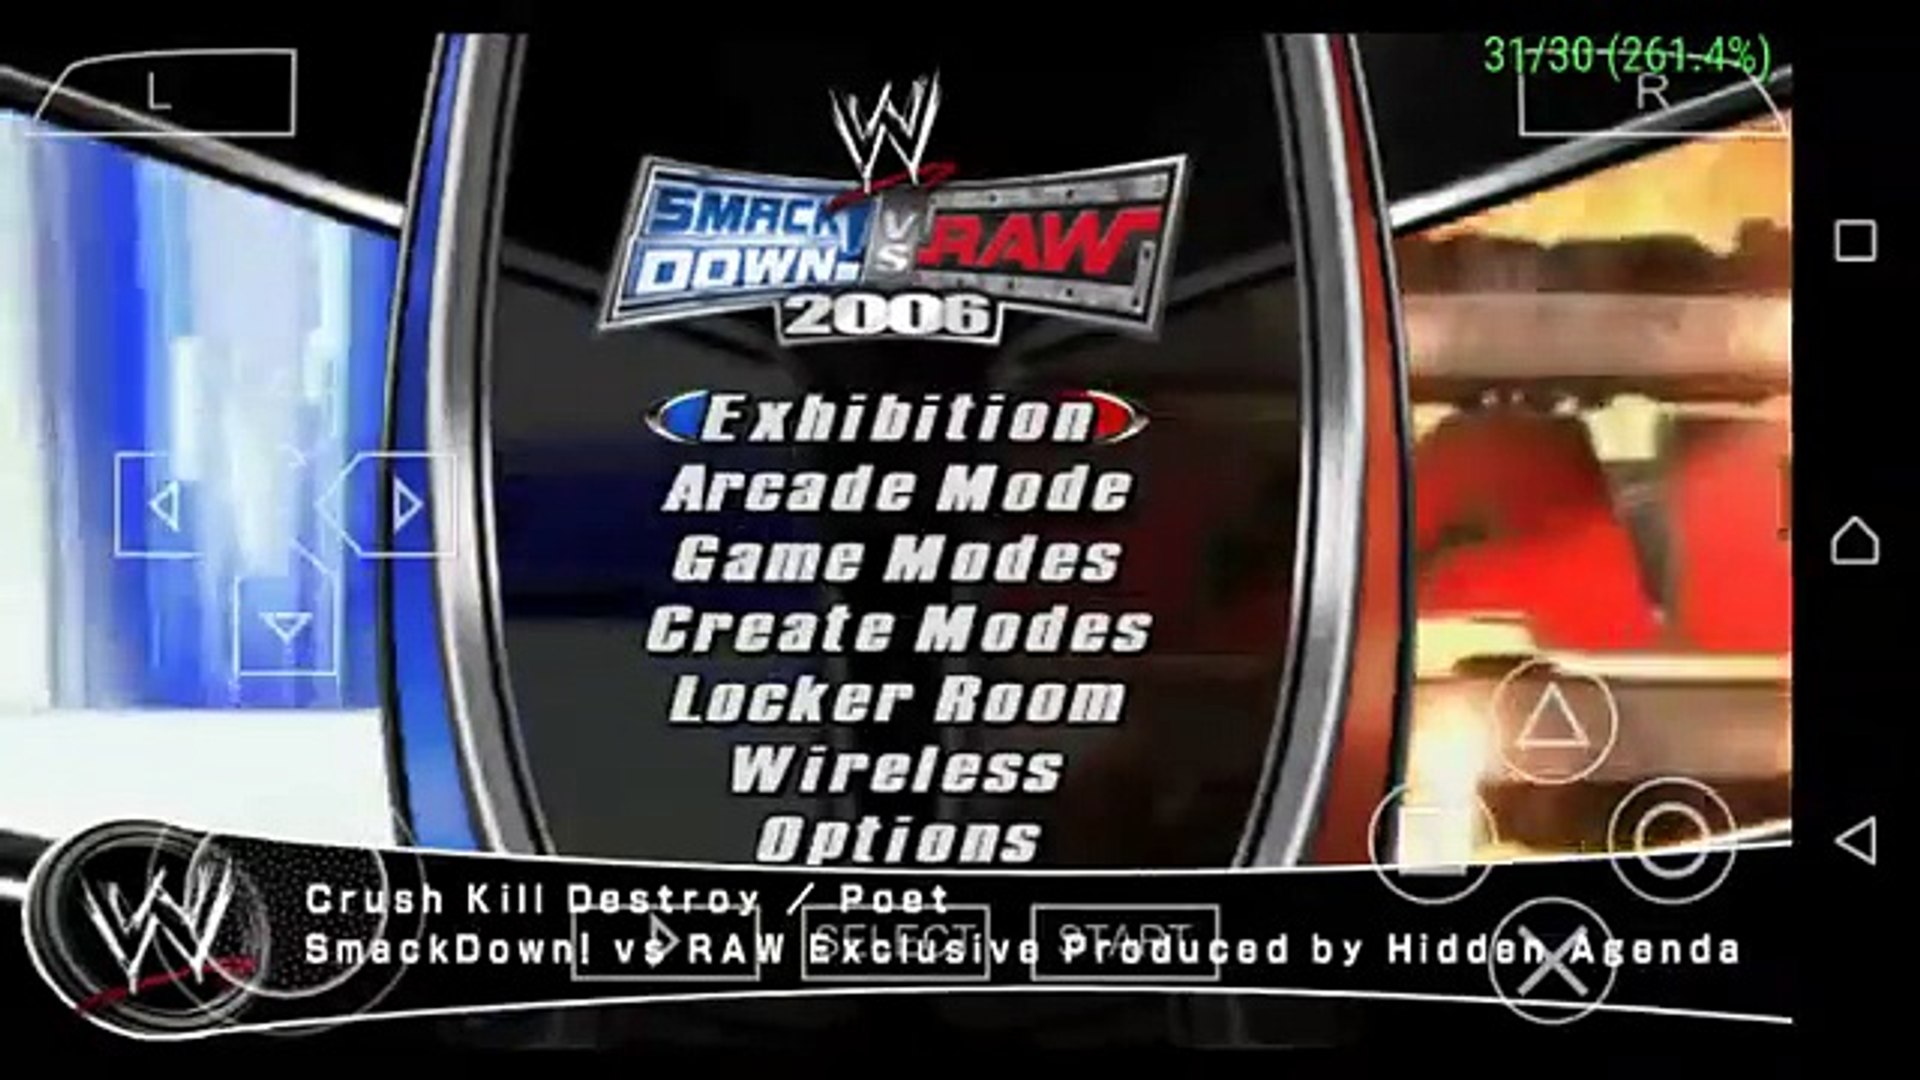 Play Wwe Smackdown Vs Raw 06 On Android Best Wwe Game On Mobile Video Dailymotion